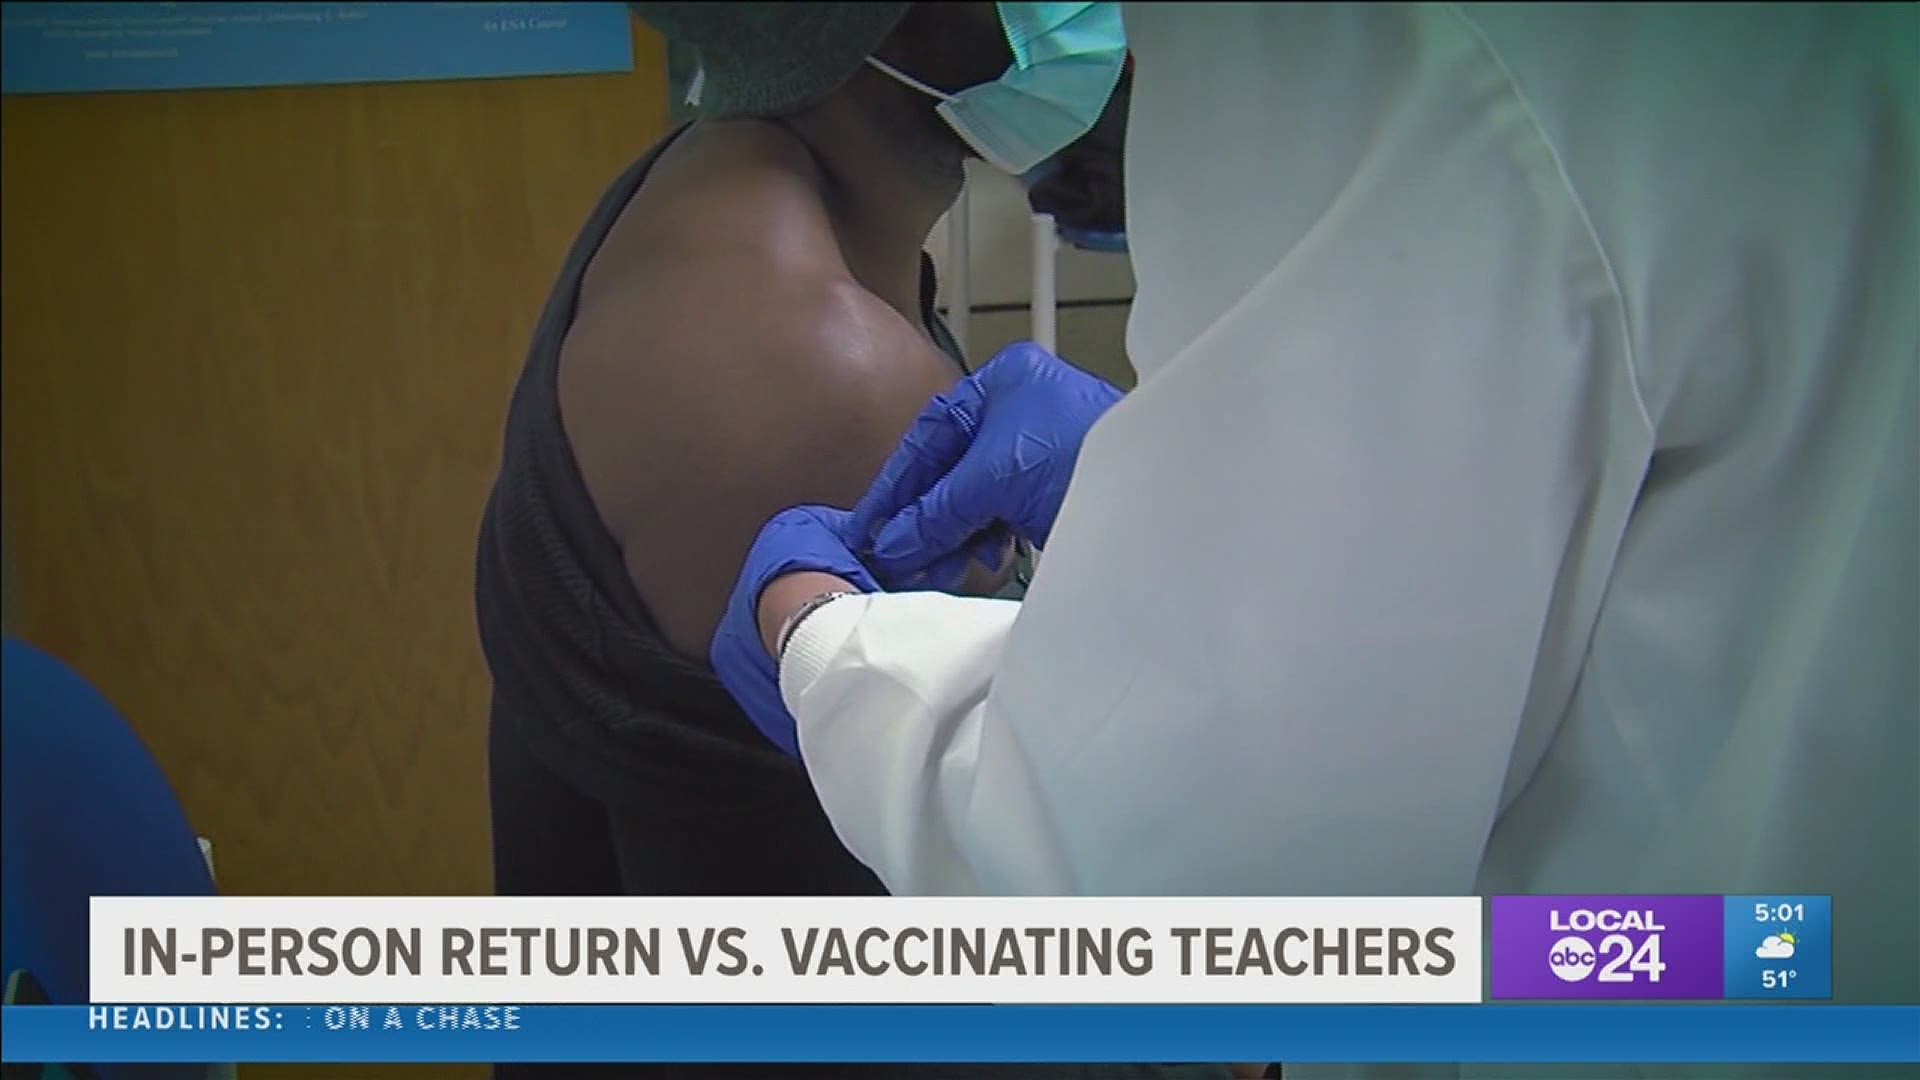 The Shelby County Health Department said teachers could start vaccinations at the end of February.